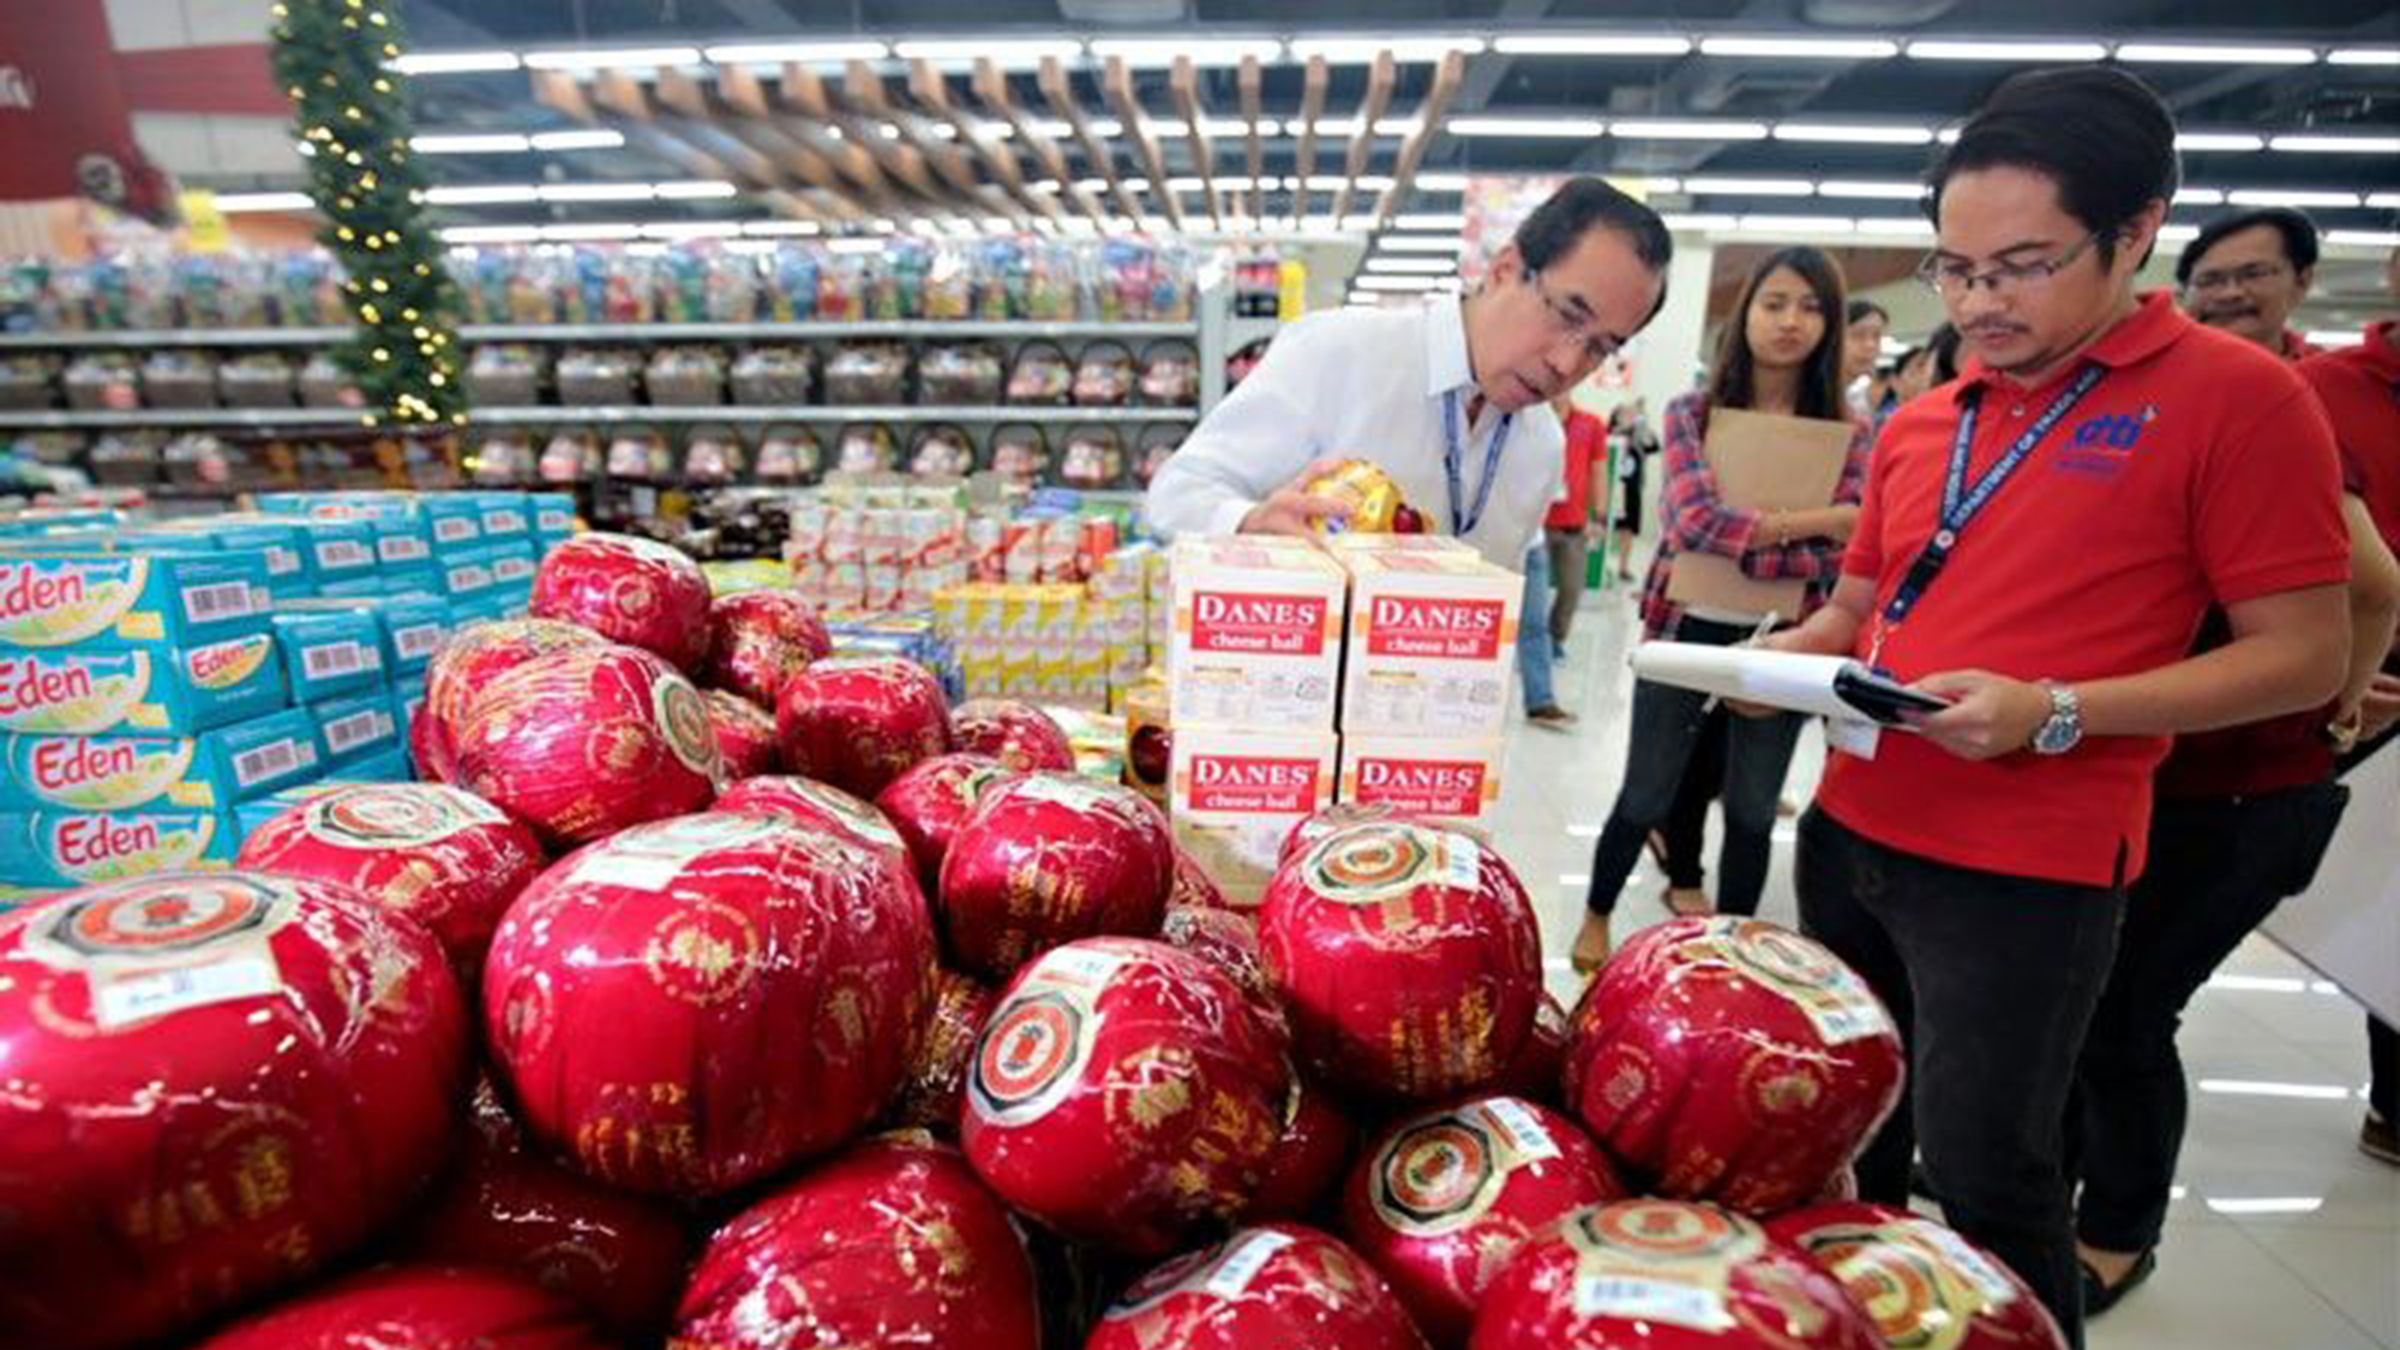 Prices of noche buena items increase ahead of holidays